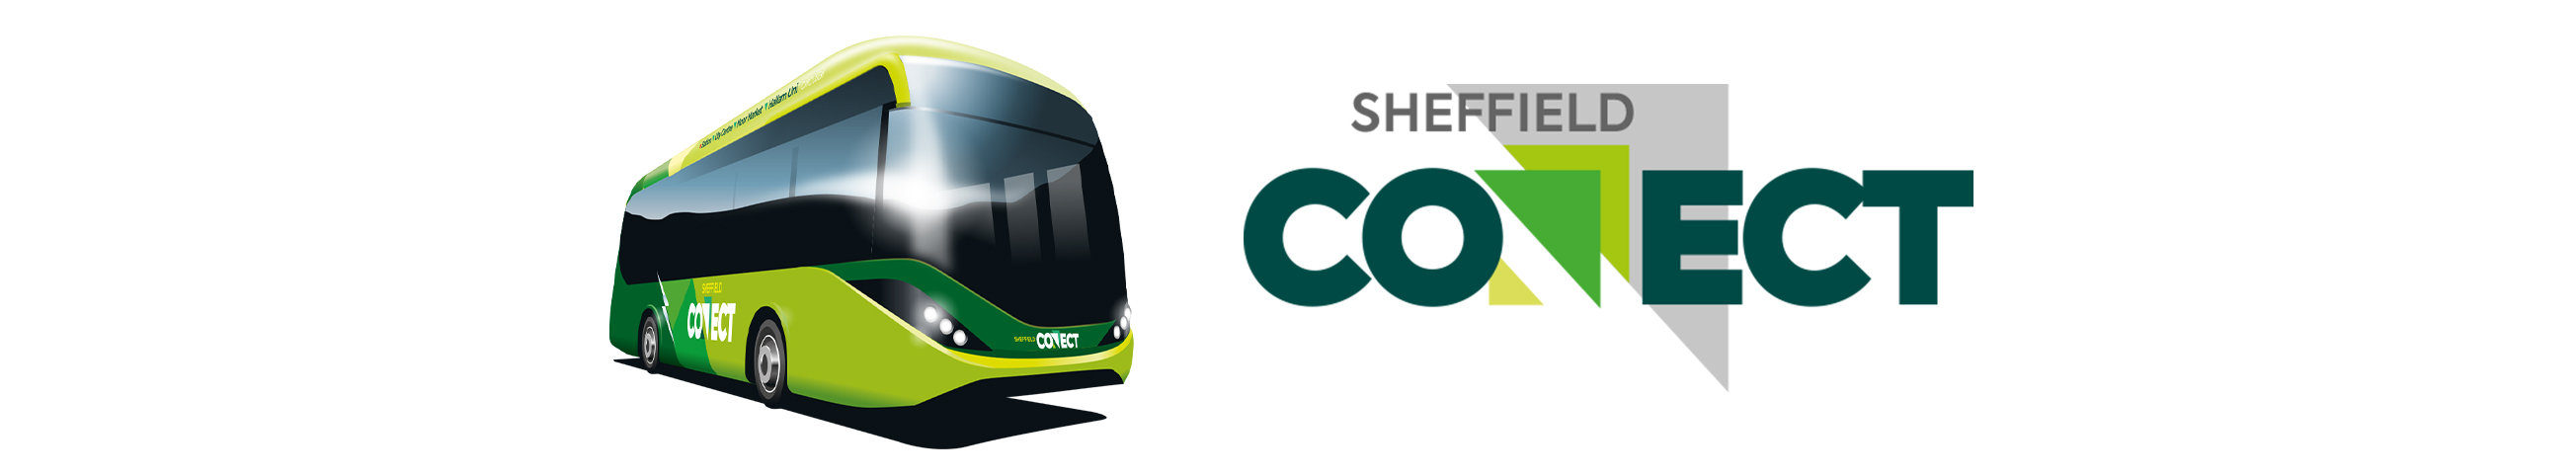 Sheffield connect is free for everyone